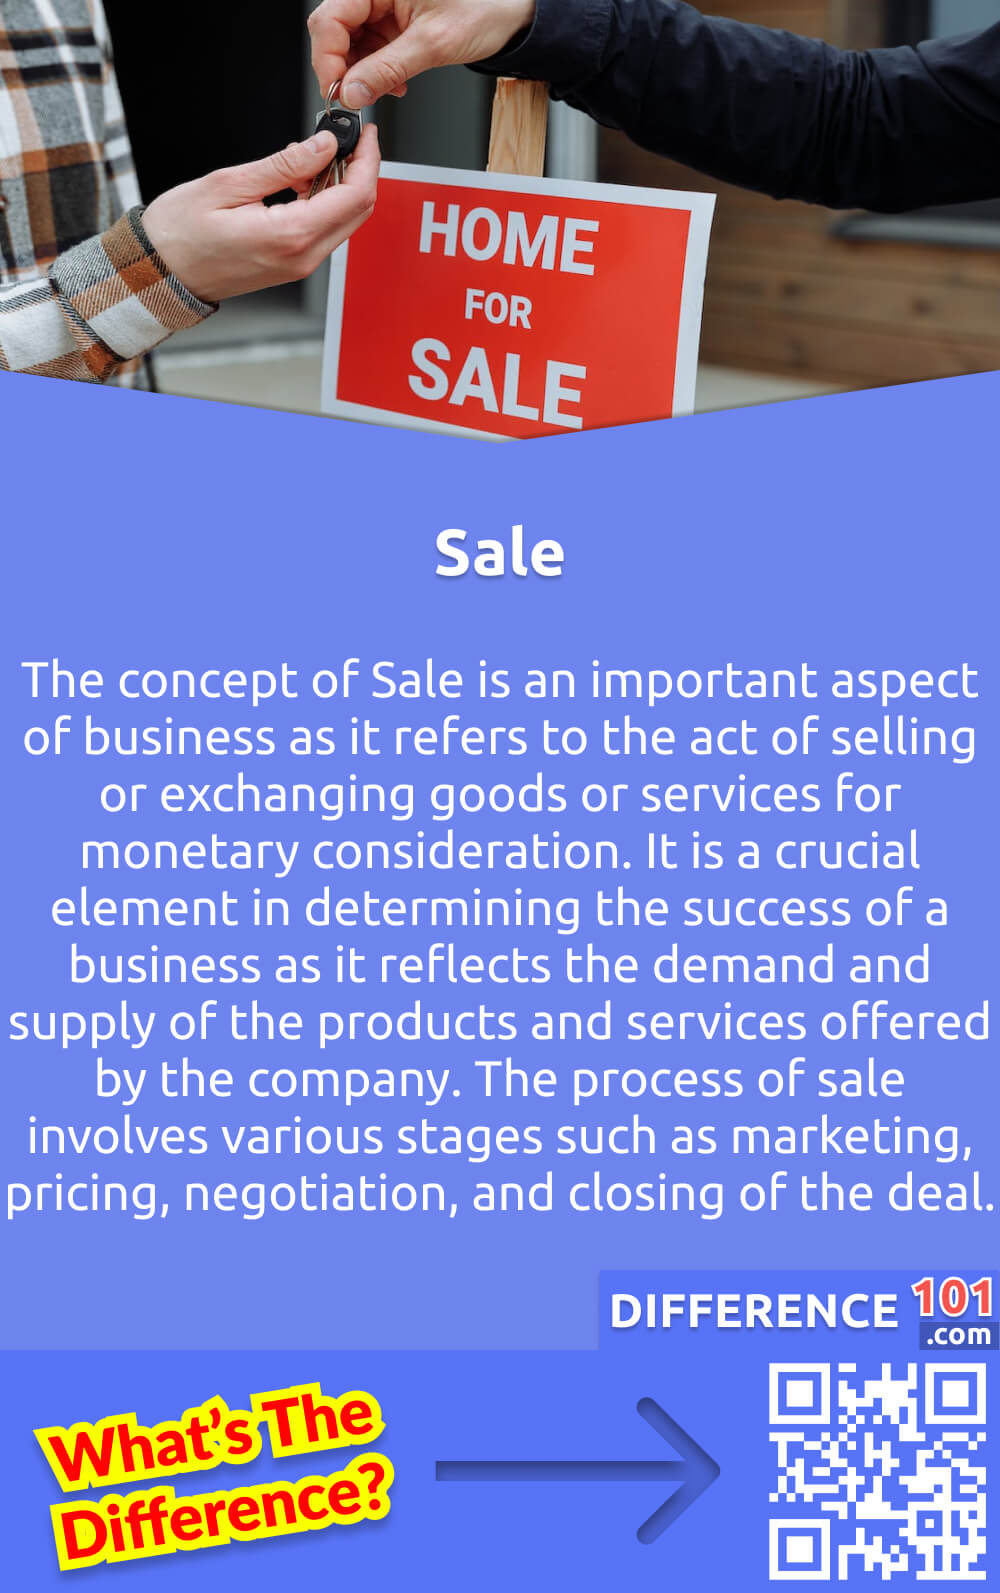 What Is Sale? The concept of Sale is an important aspect of business as it refers to the act of selling or exchanging goods or services for monetary consideration. It is a crucial element in determining the success of a business as it reflects the demand and supply of the products and services offered by the company. The process of sale involves various stages such as marketing, pricing, negotiation, and closing of the deal. To ensure a smooth sale transaction, it is essential for businesses to establish a strong market position, and to offer quality products and services. Additionally, companies need to develop effective marketing strategies to reach and engage potential customers to successfully execute sales opportunities.